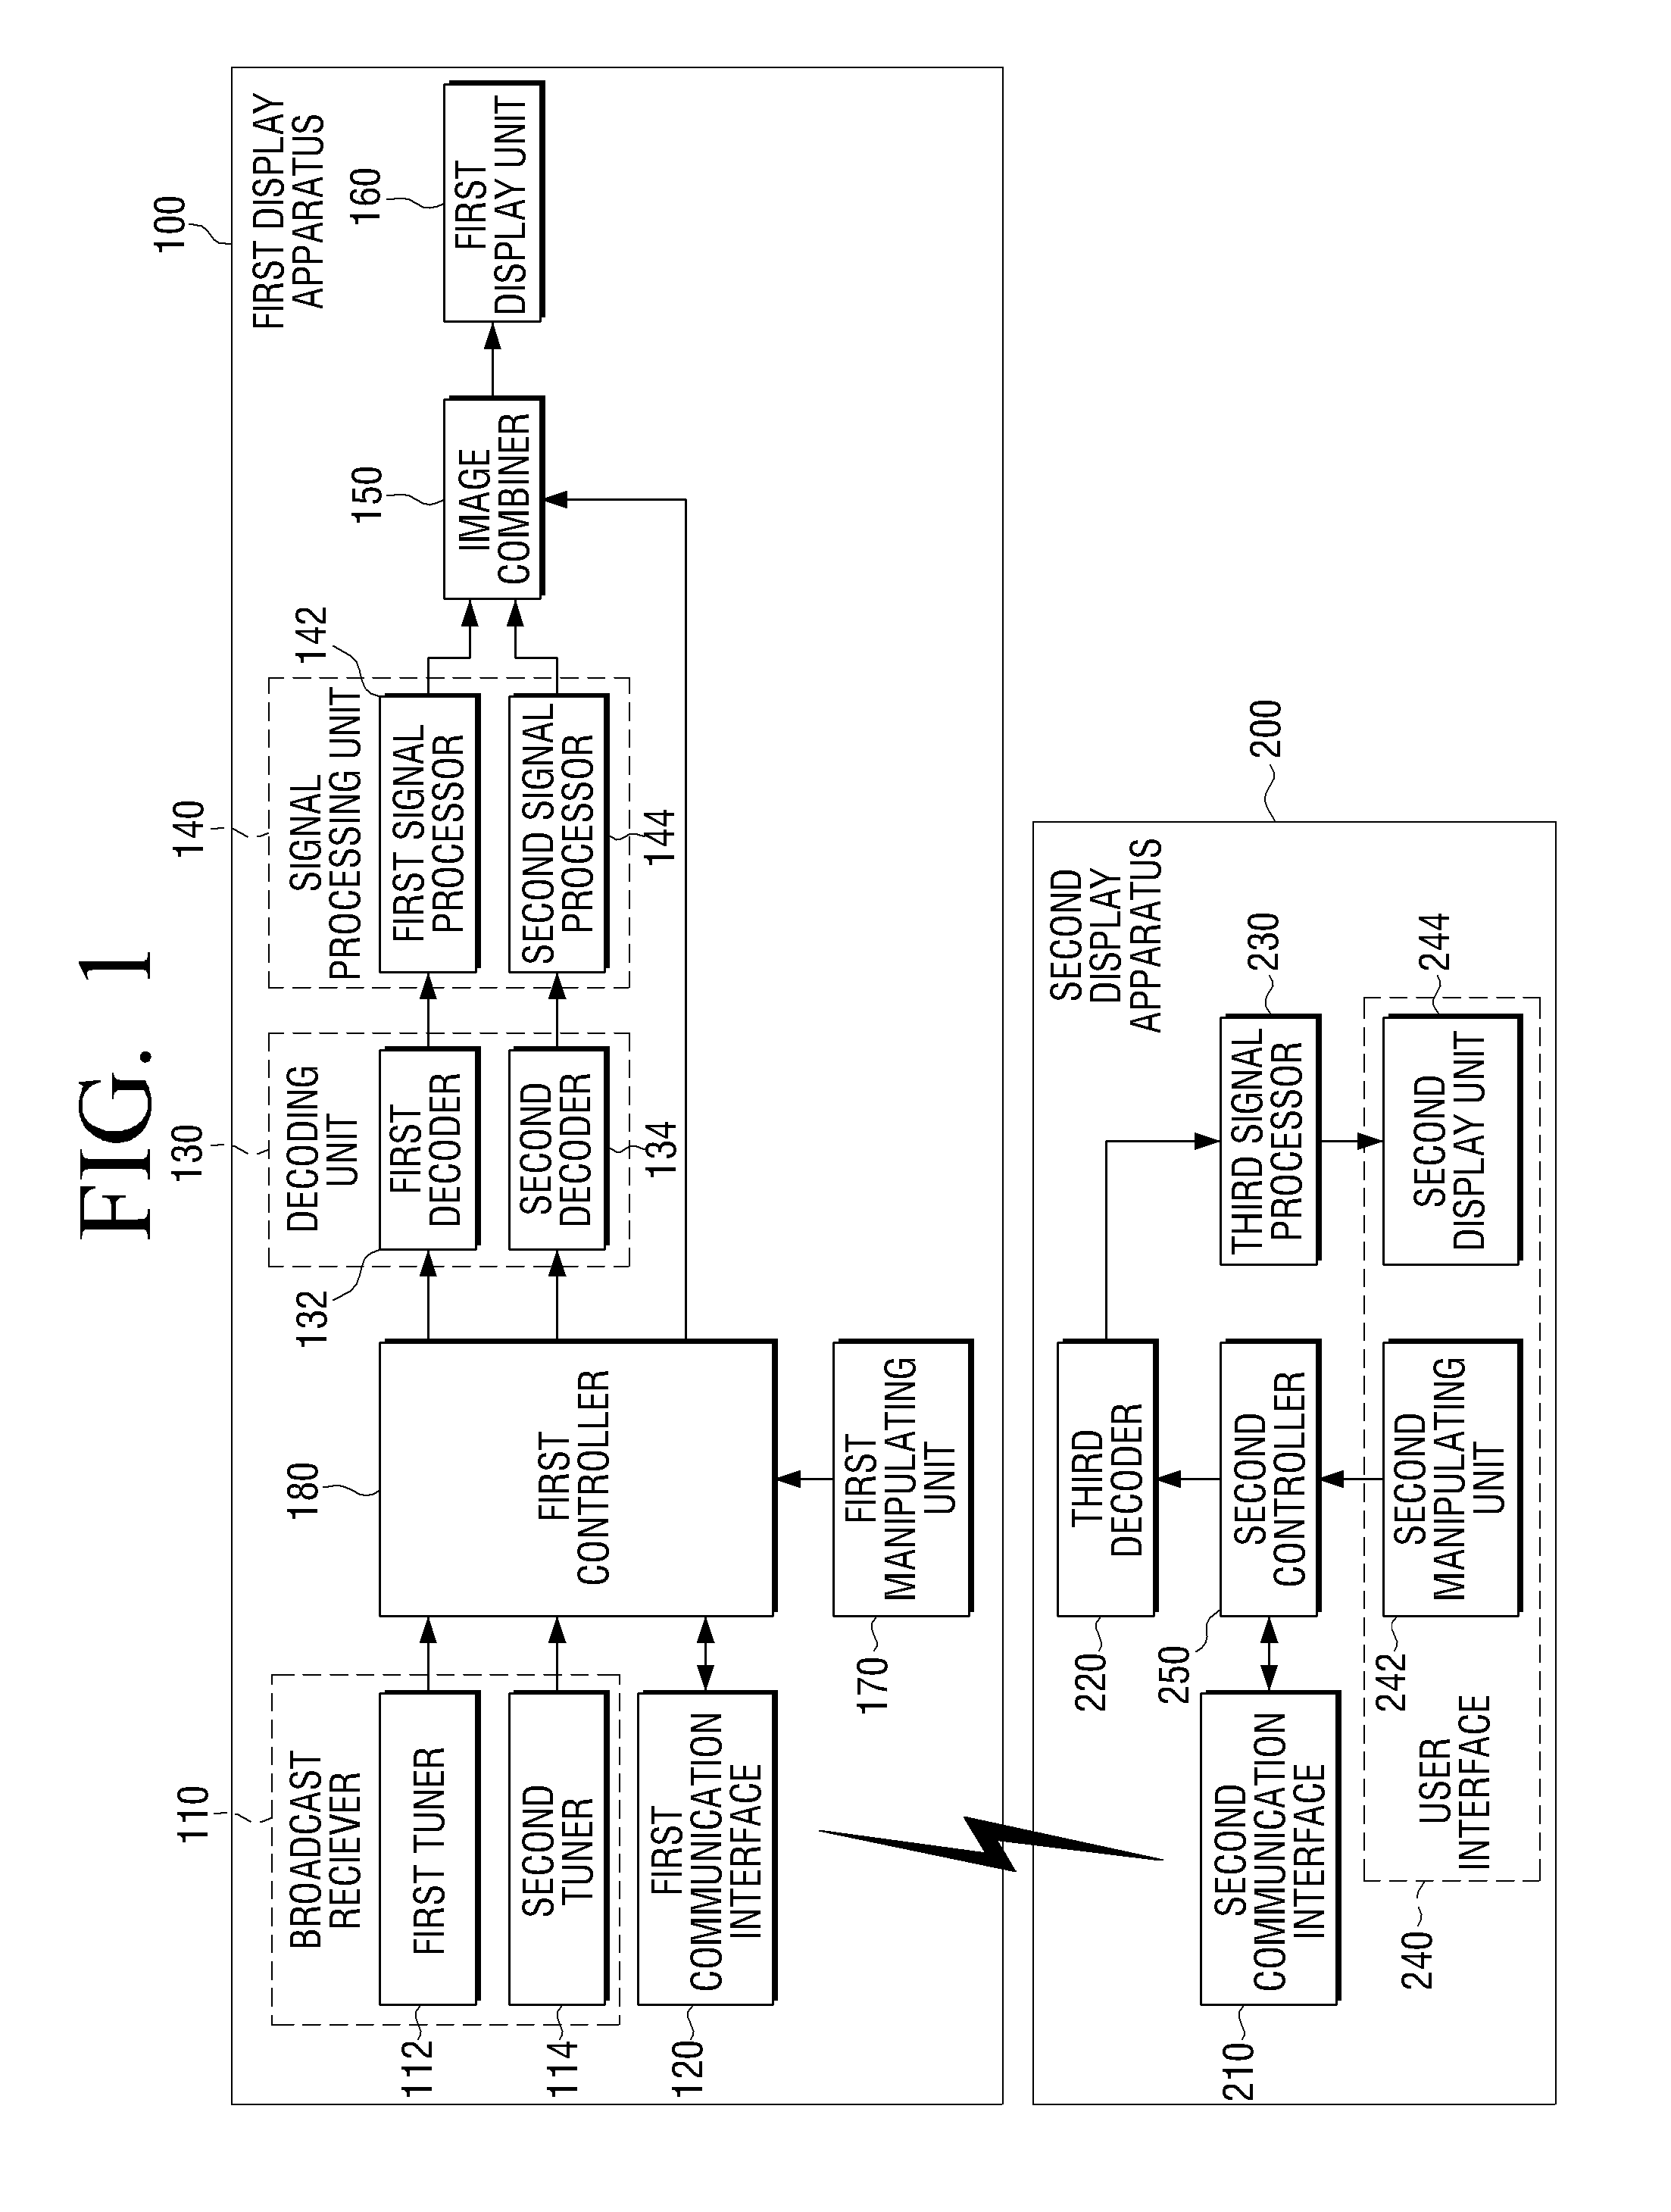 Display apparatus capable of moving image and control method thereof